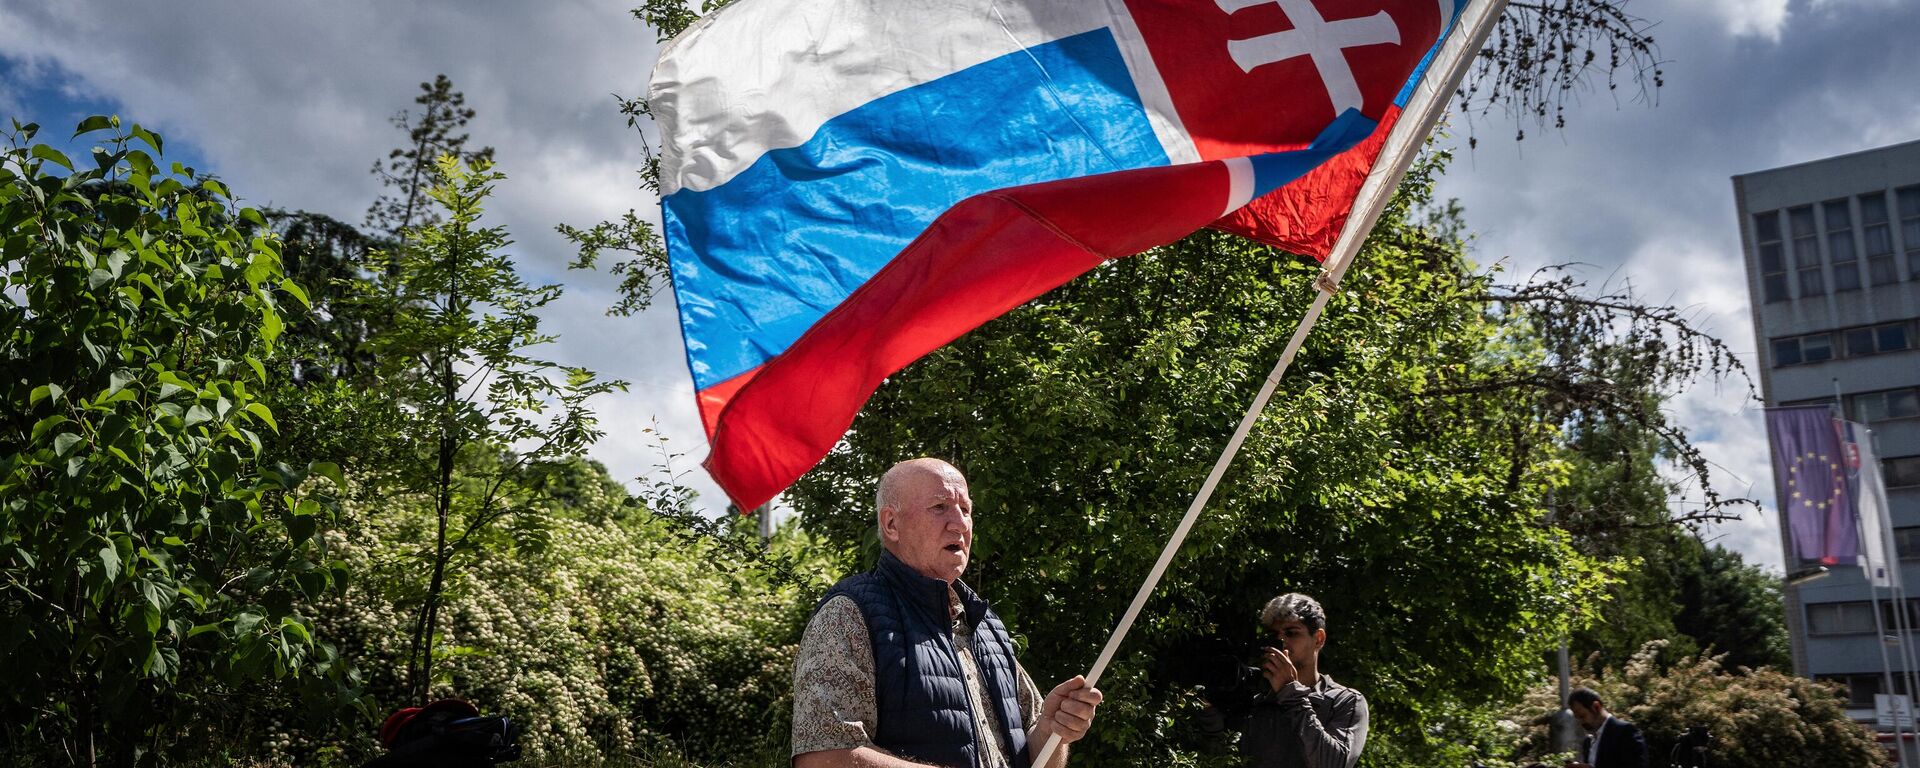 Picture taken on May 16, 2024 shows a man named Vladimir Petko holding a Slovakia flag, who came to pray in front of the hospital in Banska Bystrica, Slovakia where Slovak Prime Minister Robert Fico is being treated after he was shot multiple times the day before. Slovak Prime Minister Robert Fico's condition has stabilized overnight but is still very serious, the deputy prime minister said on May 16, 2024. - Sputnik International, 1920, 16.05.2024